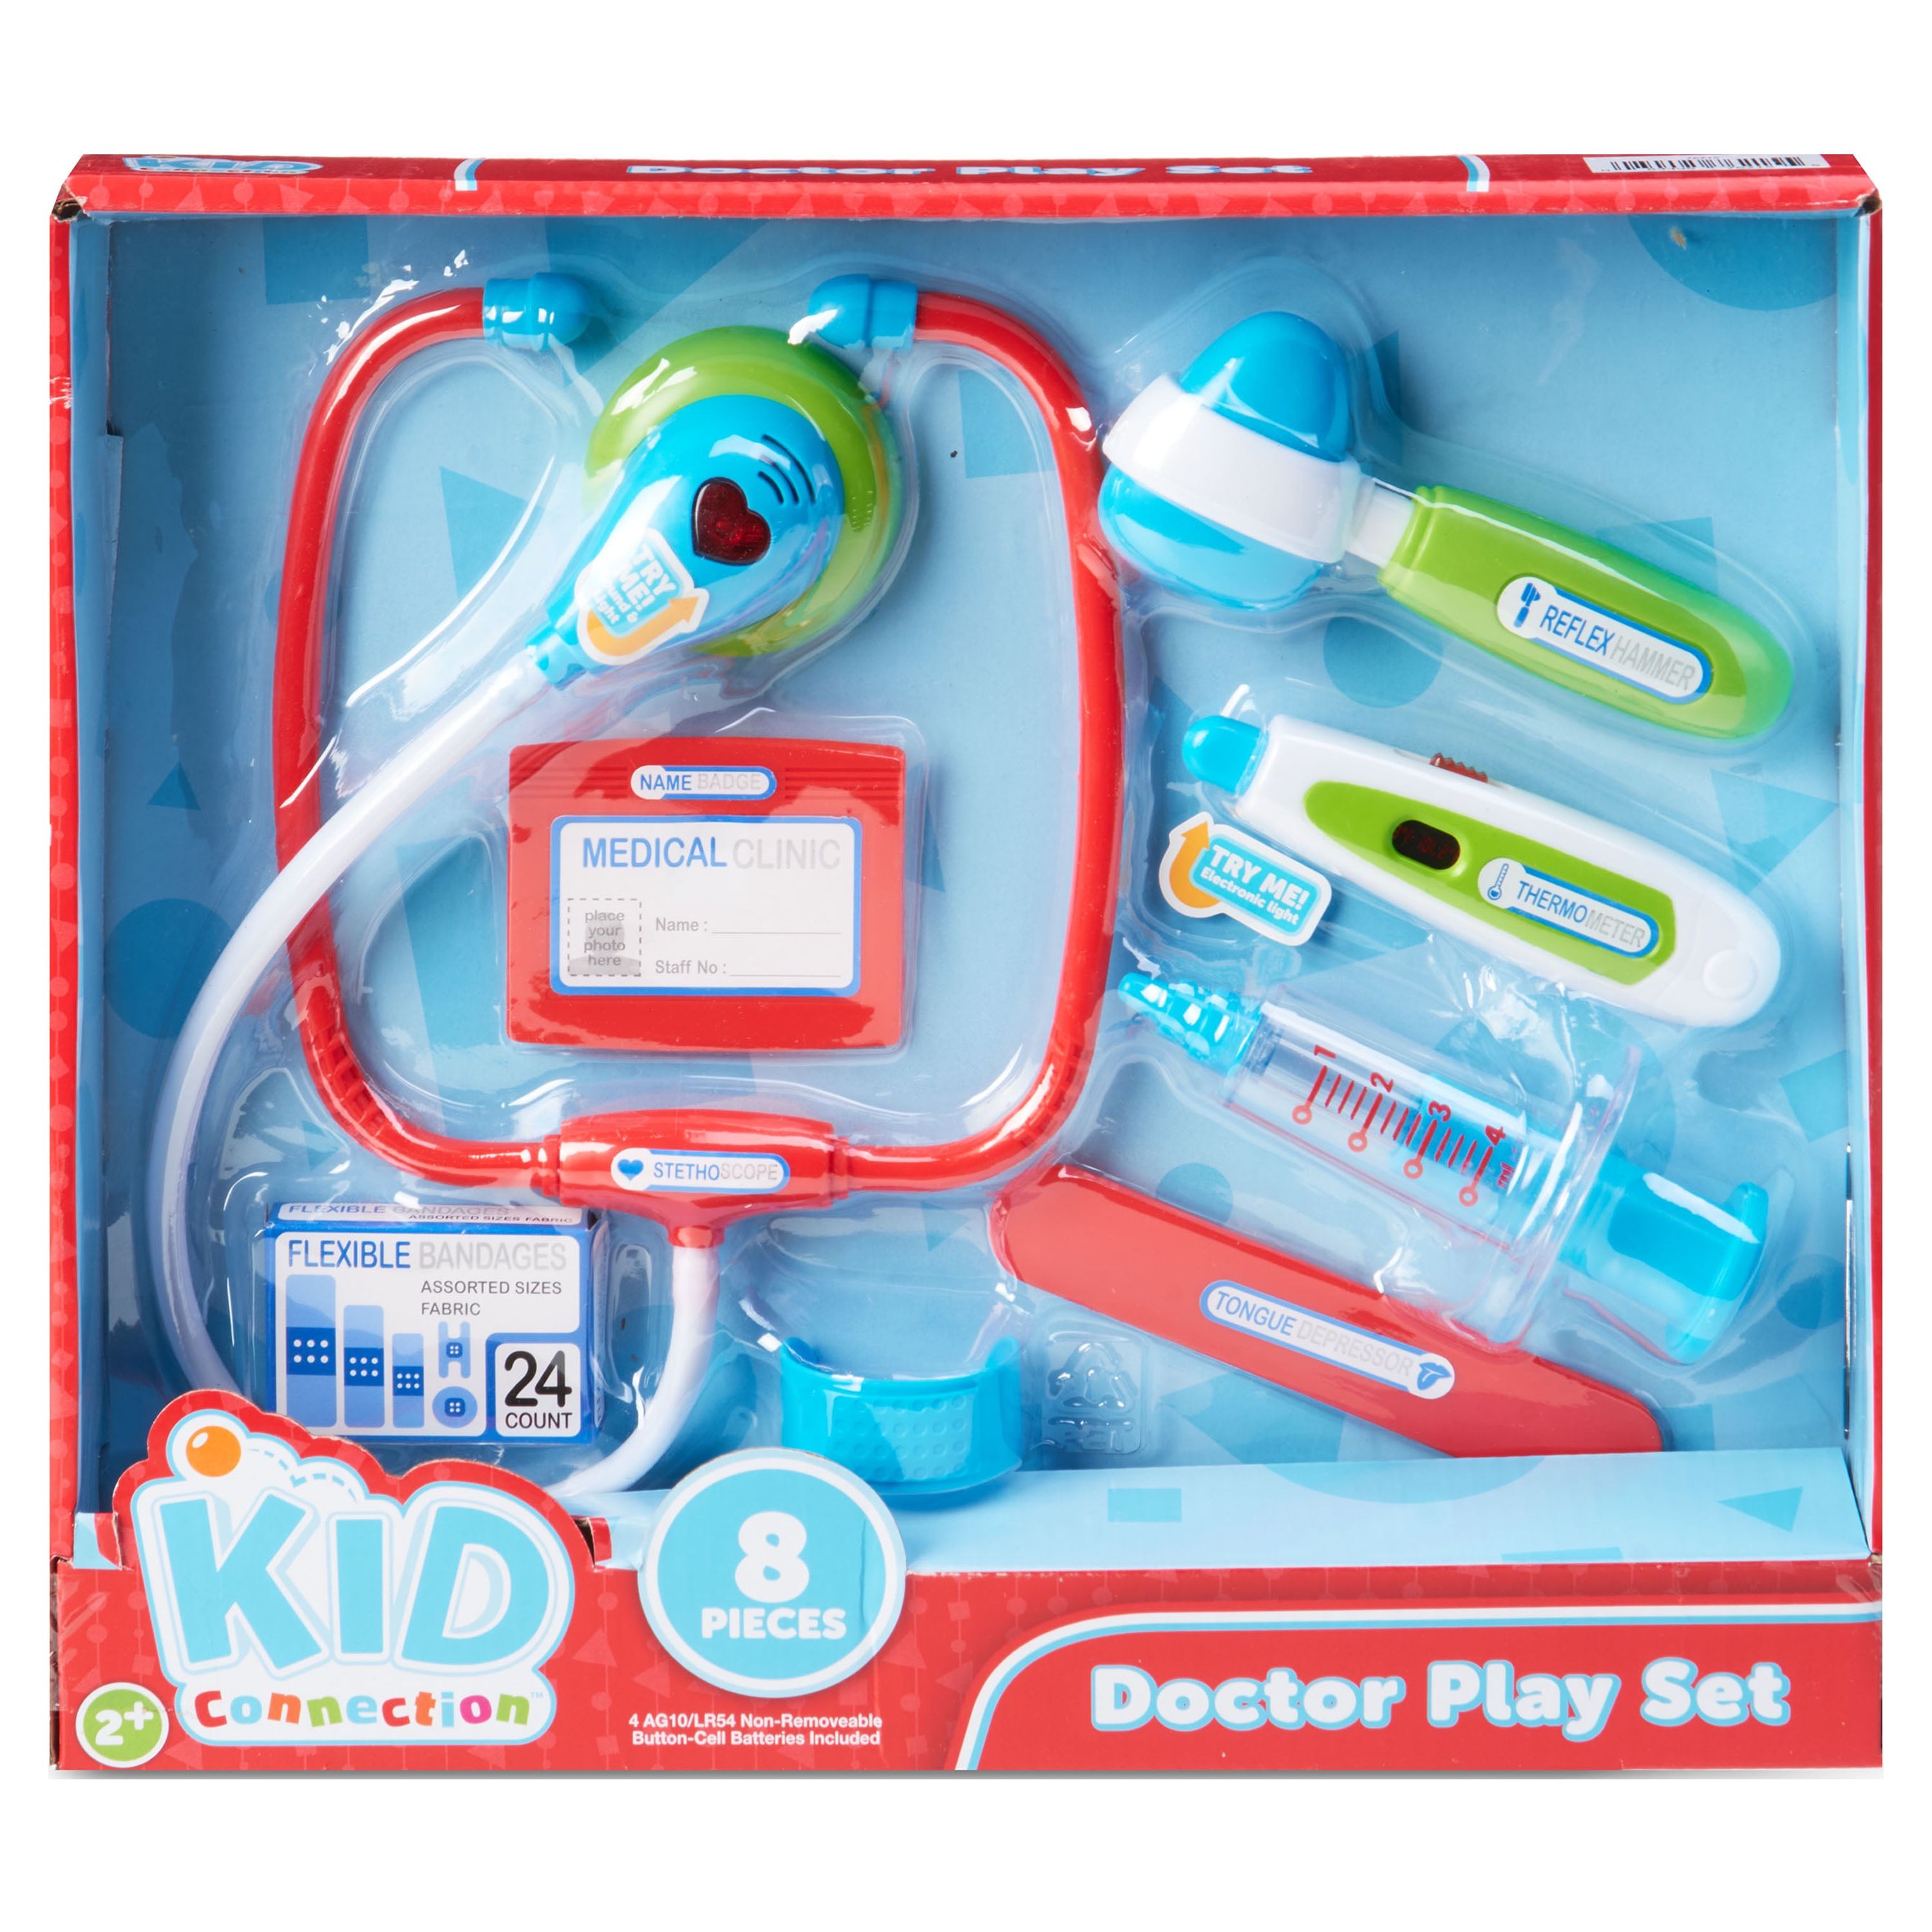 Kid Connection Doctor Play Set, 8 Pieces - image 1 of 4